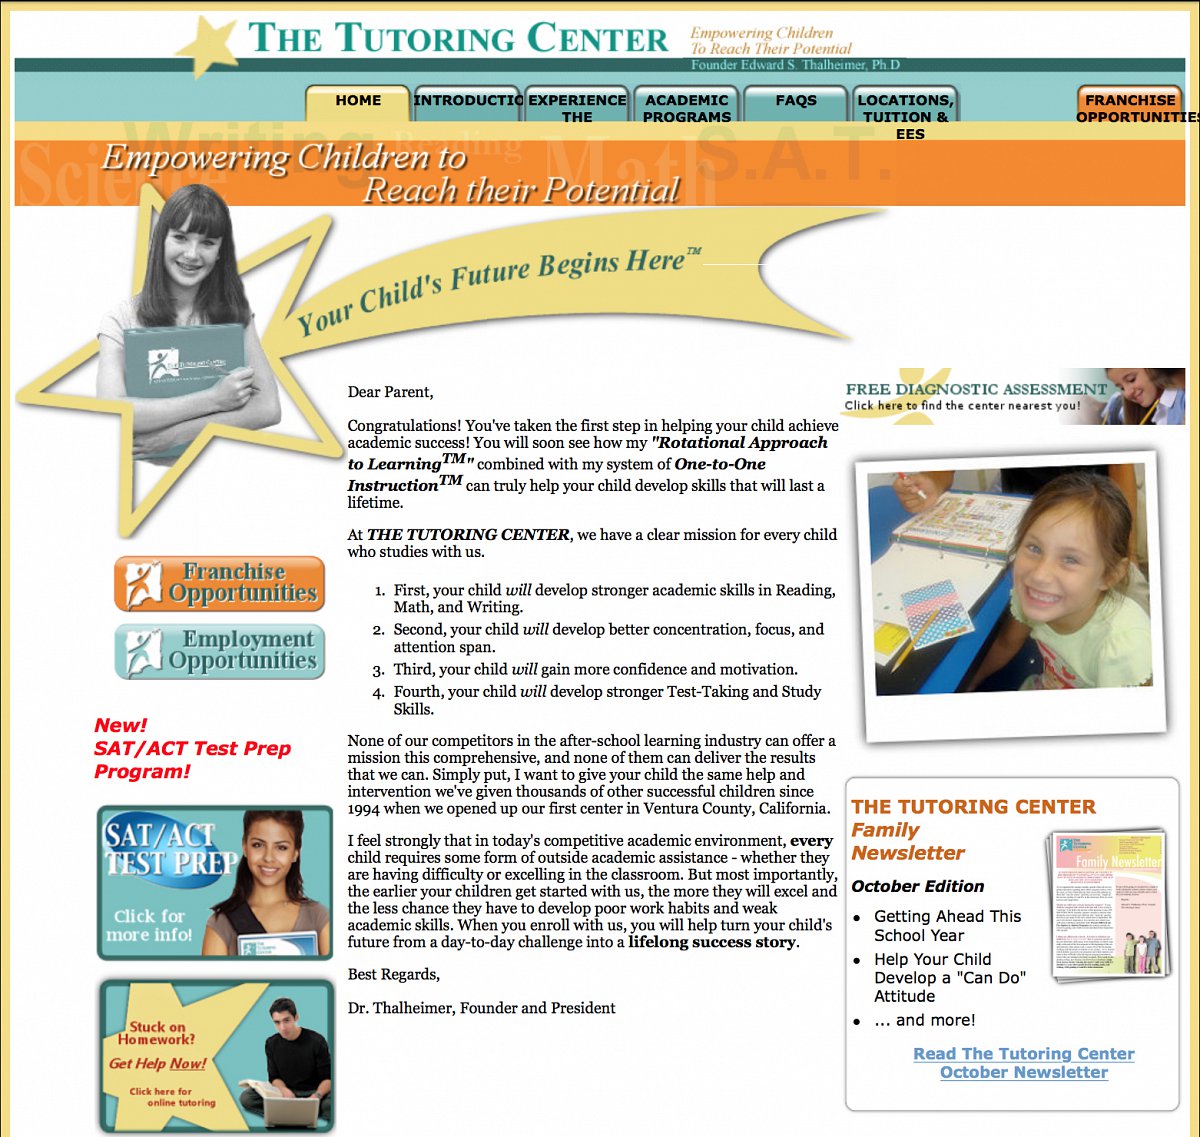 Previous homepage for The Tutoring Center